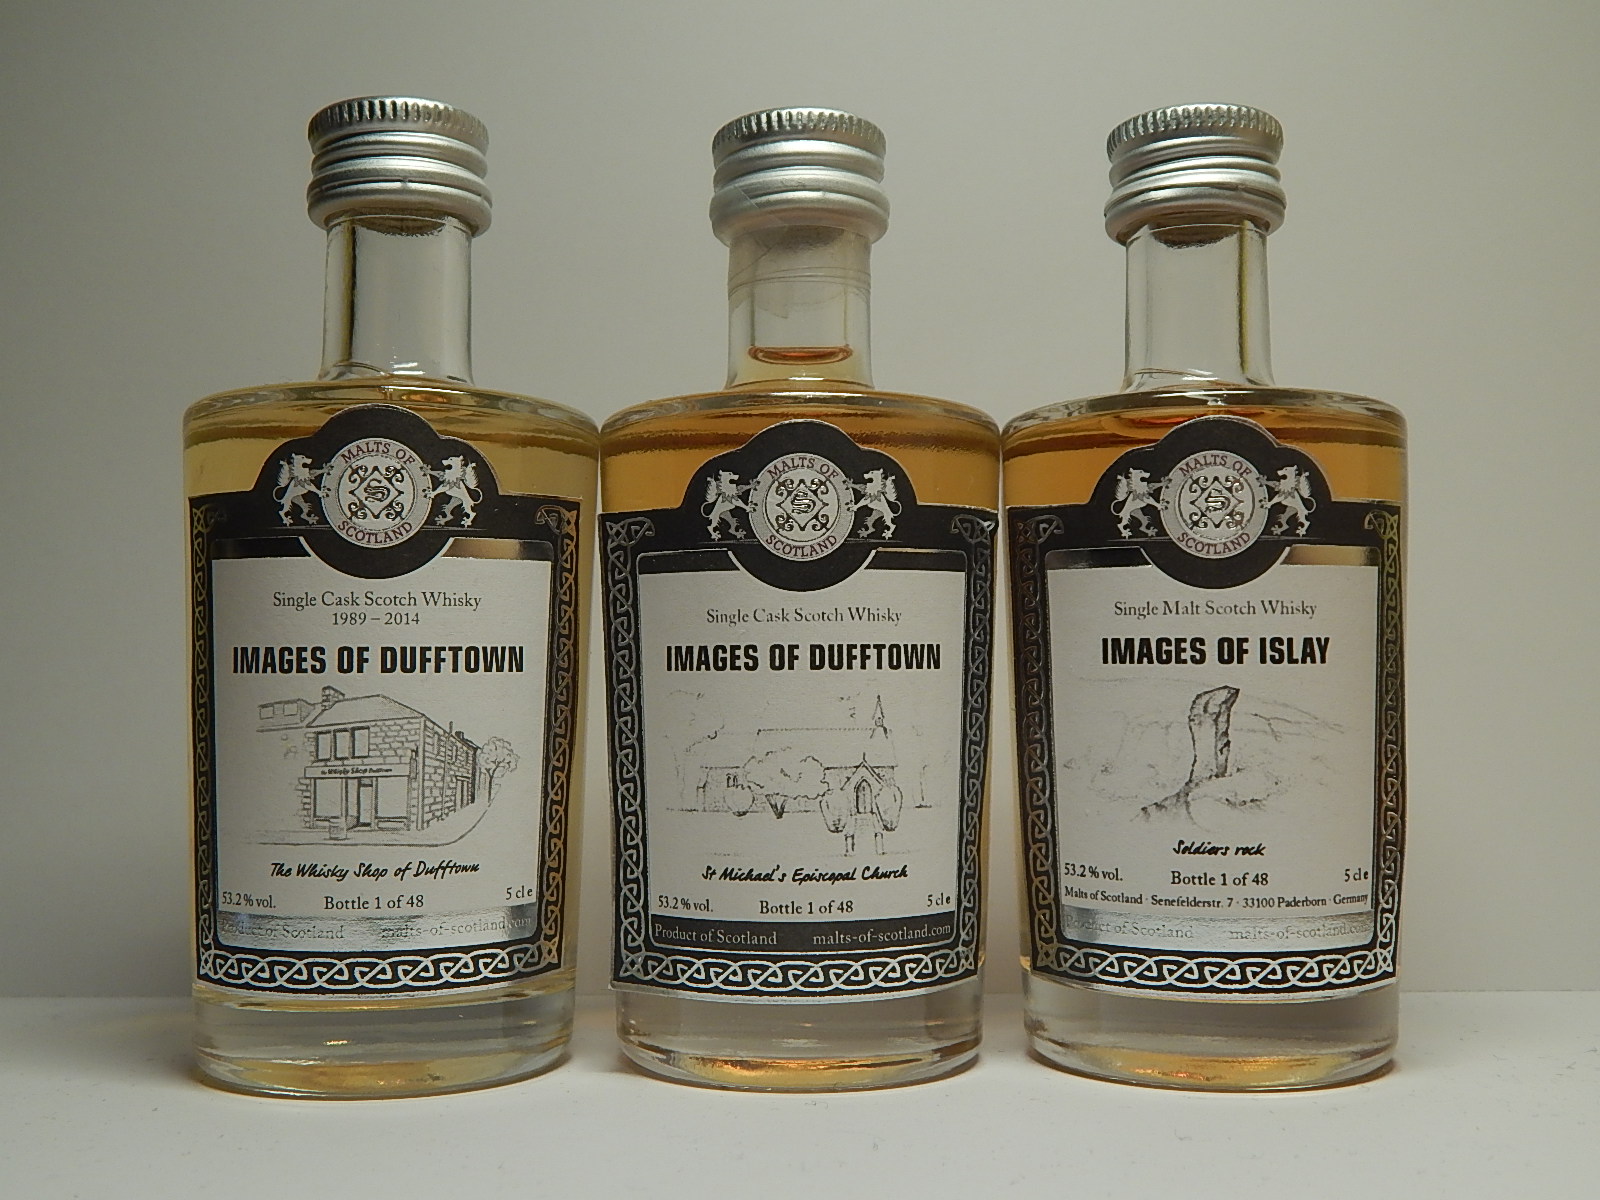 IMAGE OF DUFFTOWN - IMAGES OF ISLAY "Malts of Scotland"